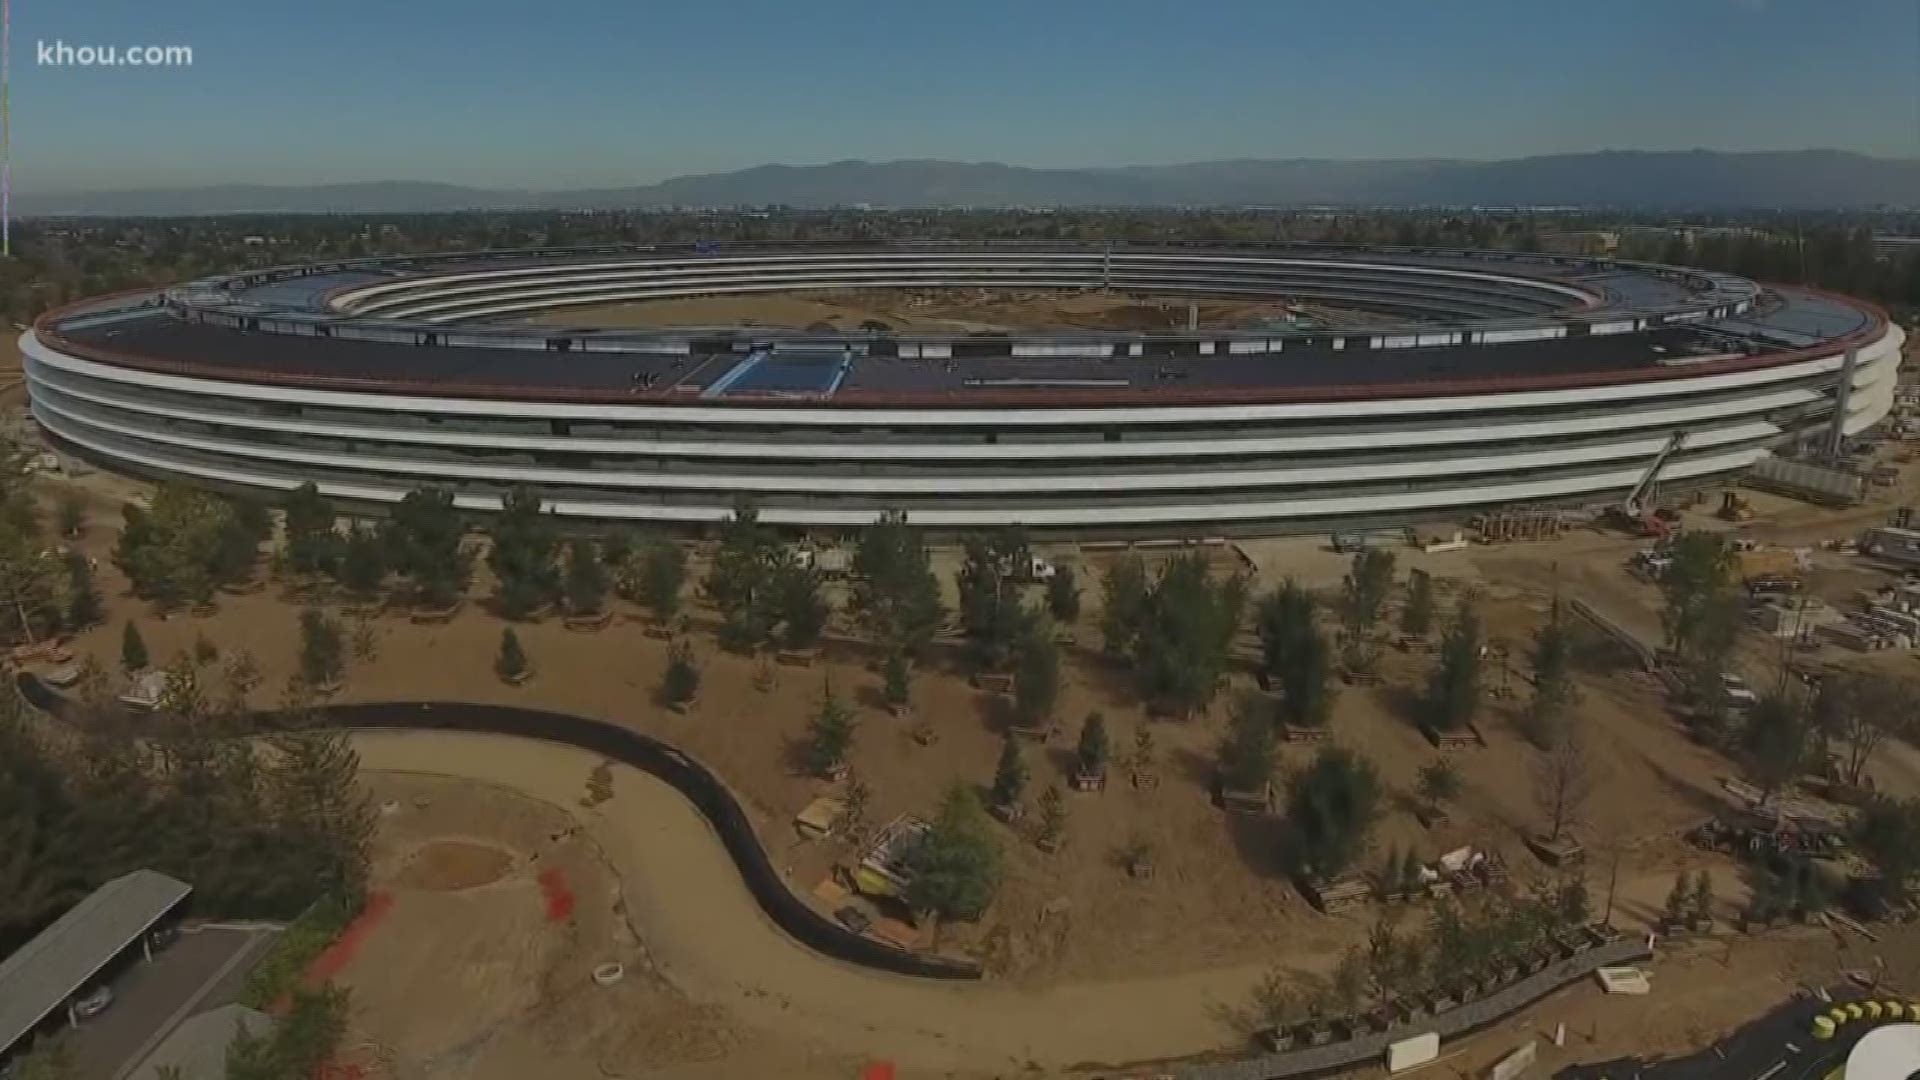 Apple says it plans to build a $1 billion campus in Austin, Texas.